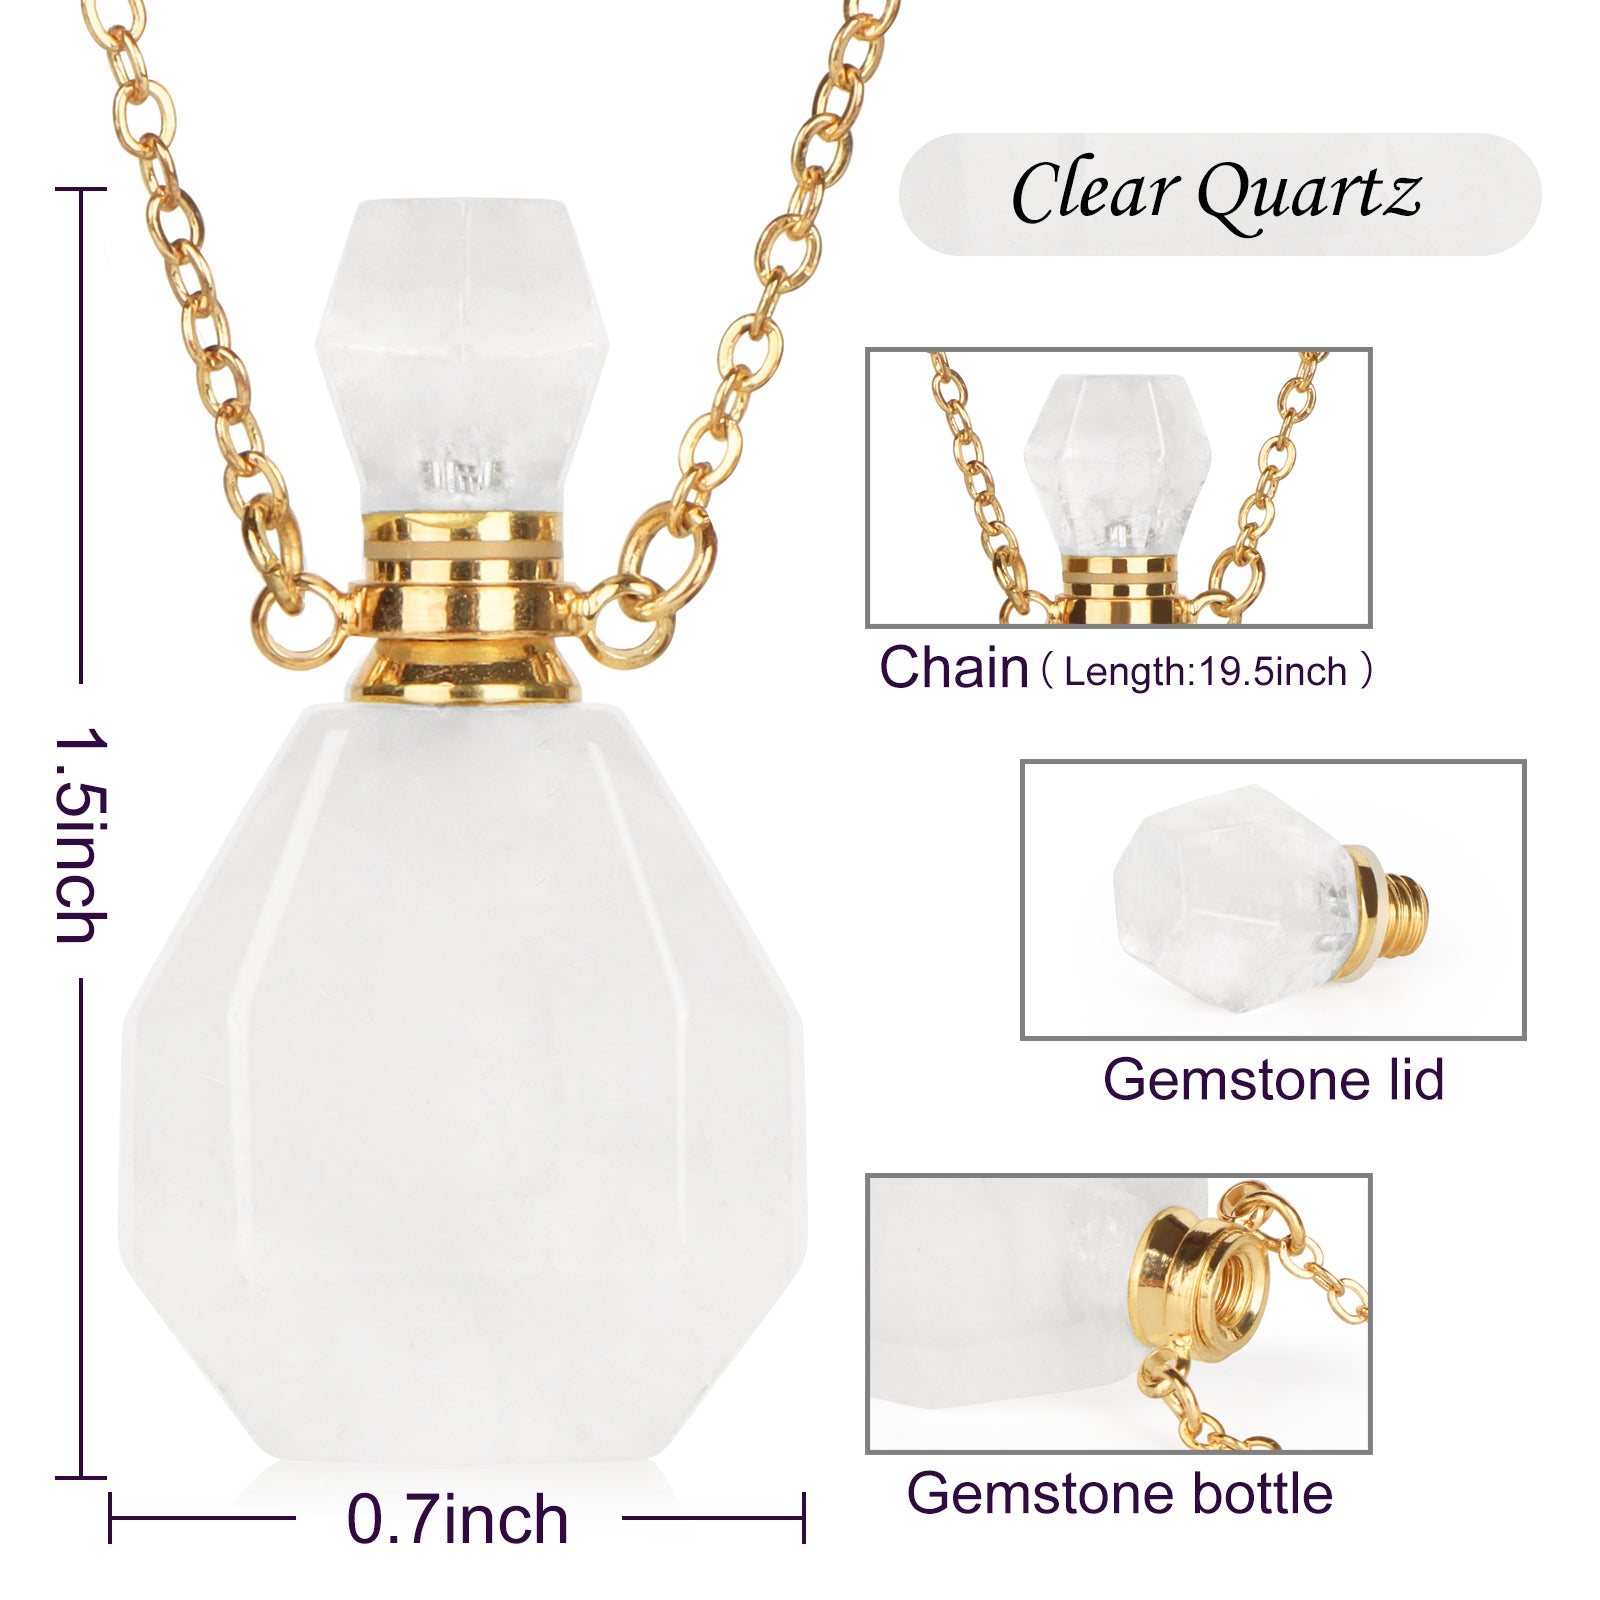 Essential Oil Diffuser Necklace for Women Aromatherapy Locket Anxiety Relief Necklace Perfume Bottle Pendant with Chain Gemstone Jewelry Aoxily CHN, Inc. All Rights Reserved.